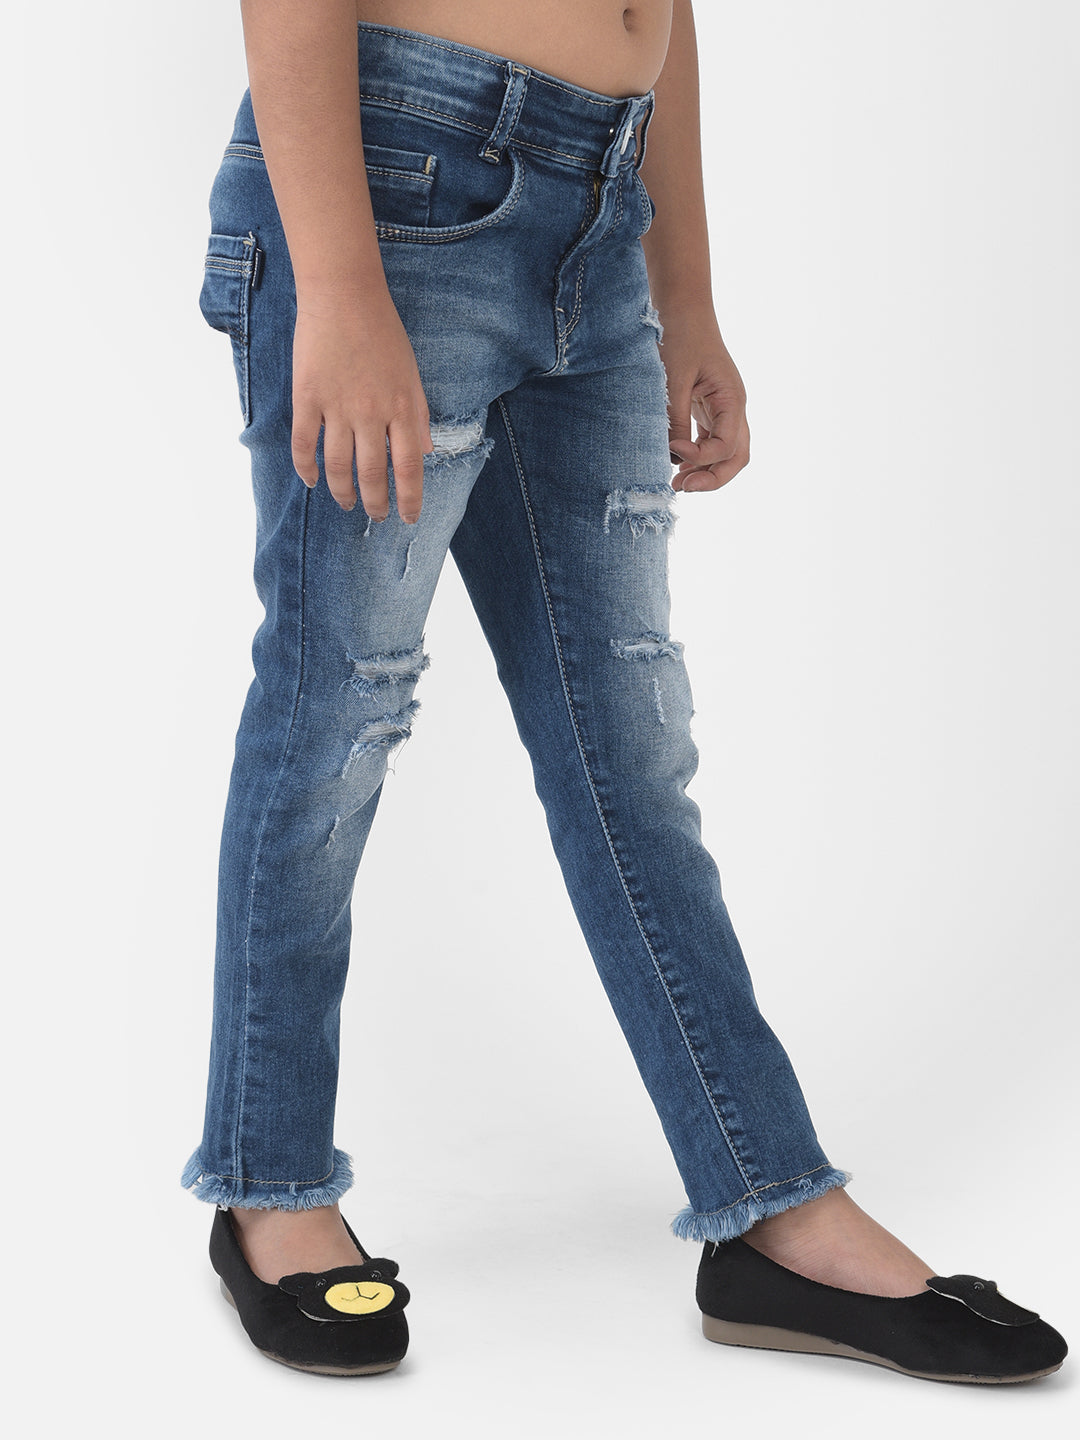 Blue Light Fade Distressed Jeans - Girls Jeans